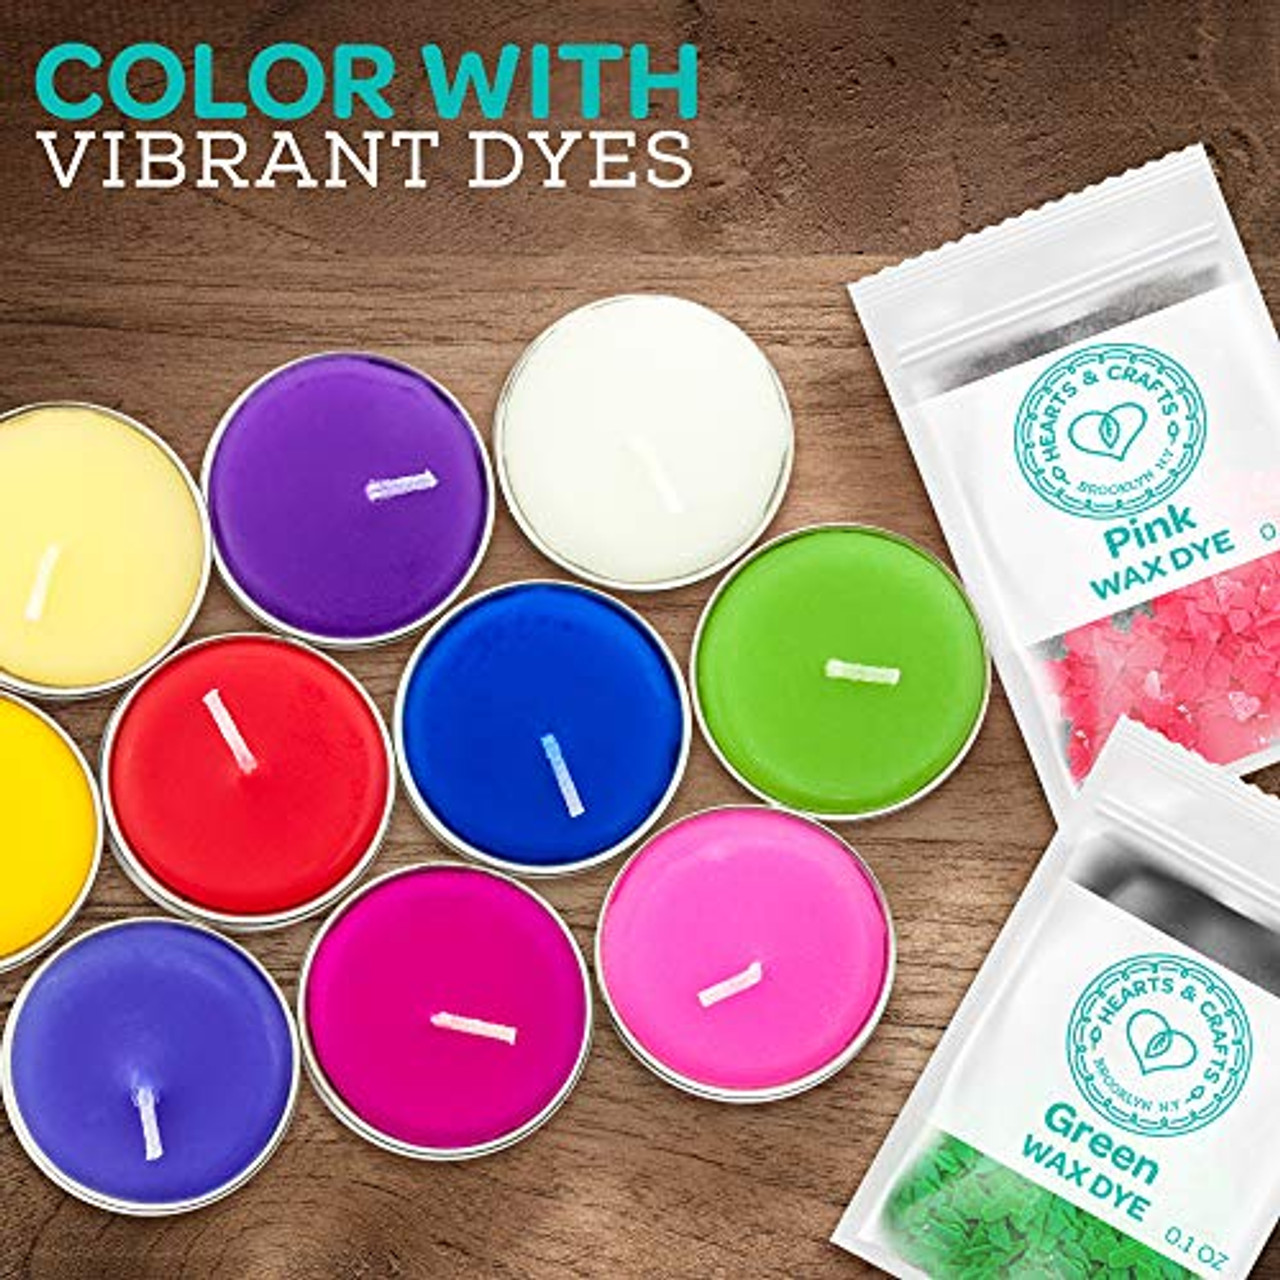 Candle Shop - Bright Yellow Dye for 45 lb of Wax - Candle dye Chips for  Making Candles - Candle Wax Dye